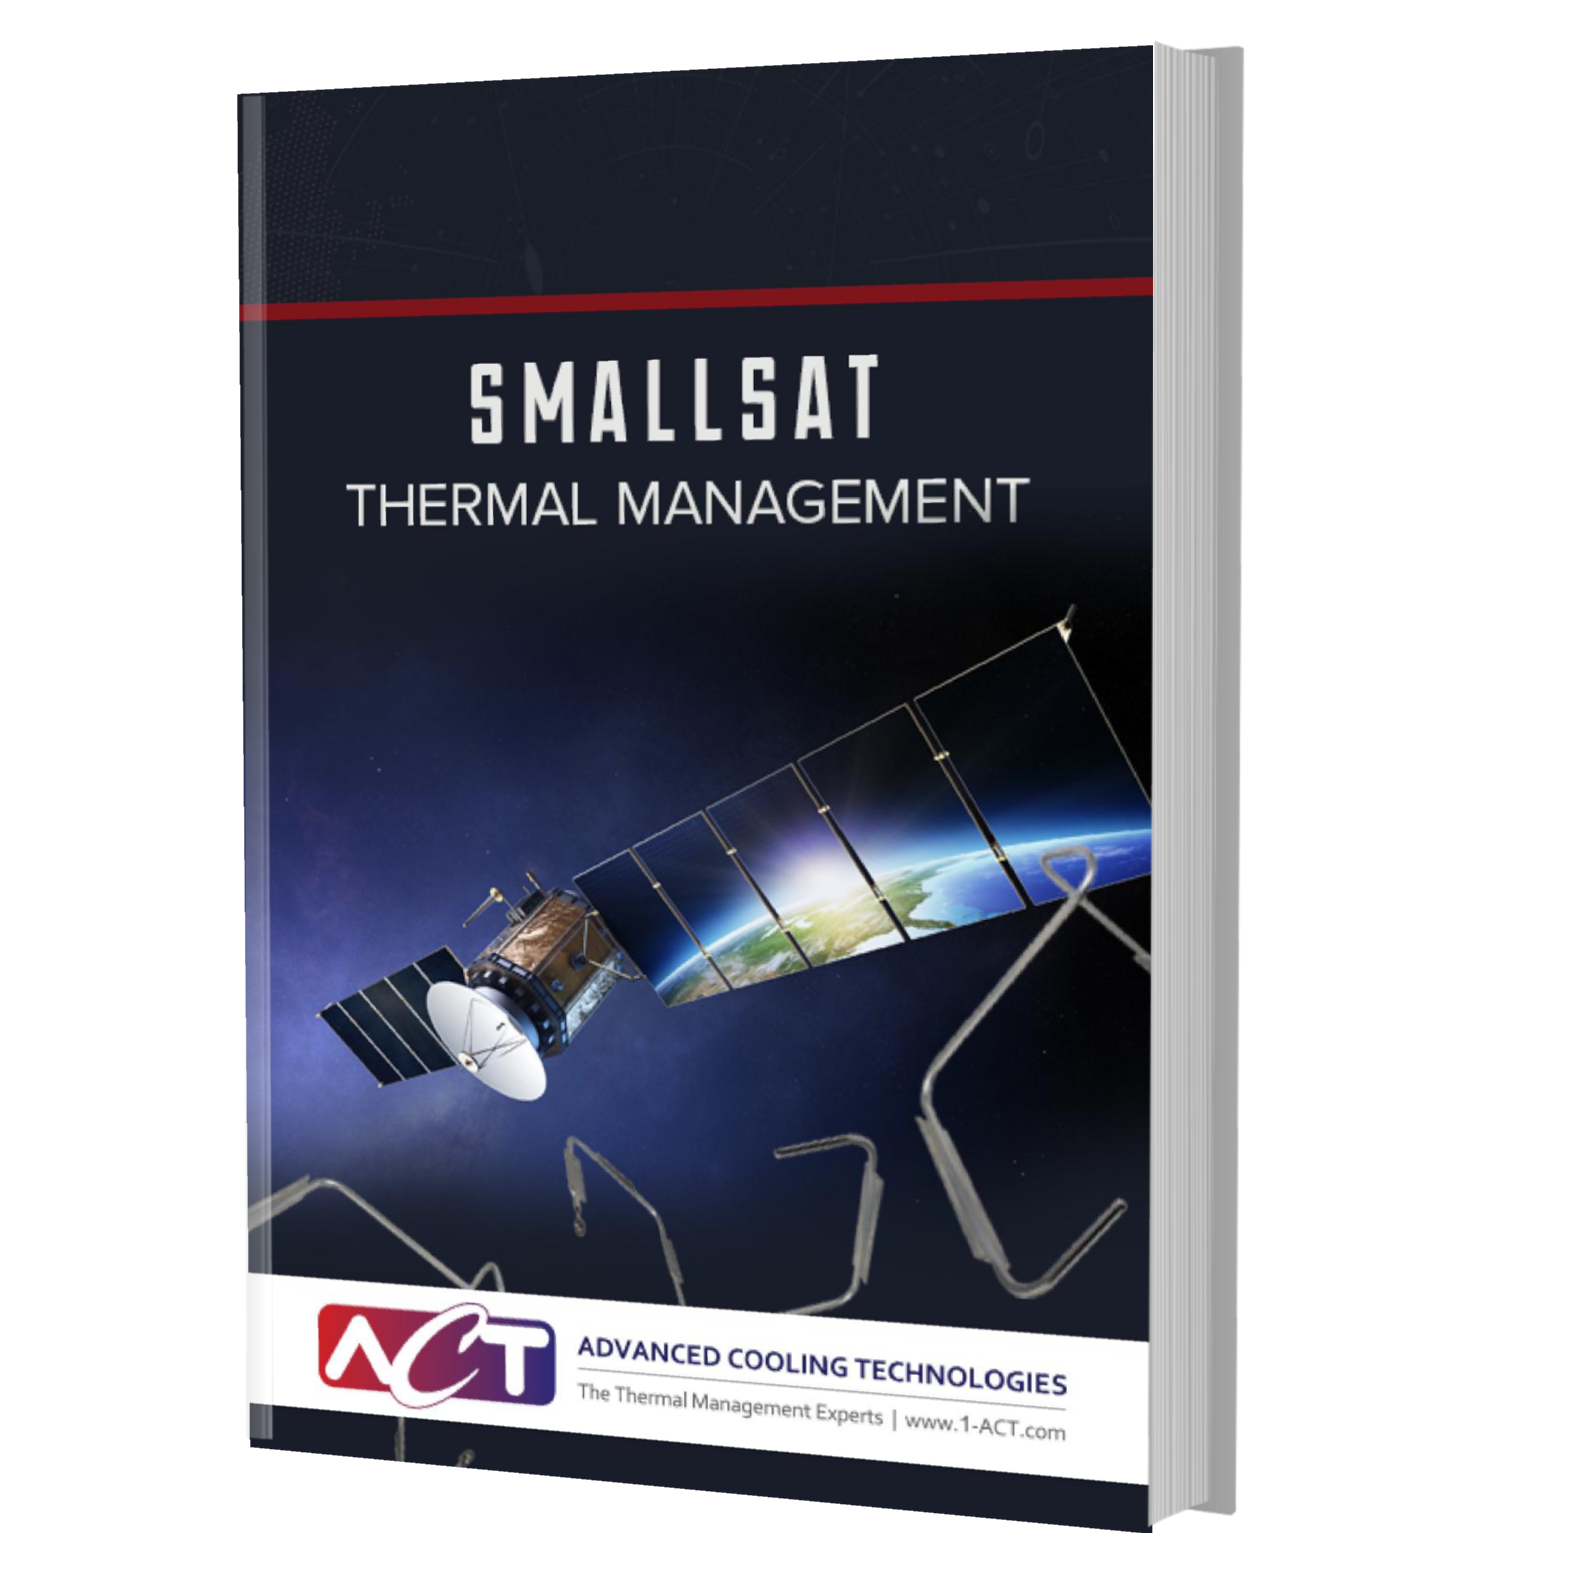 Download the SmallSat Thermal Management eBook Now!